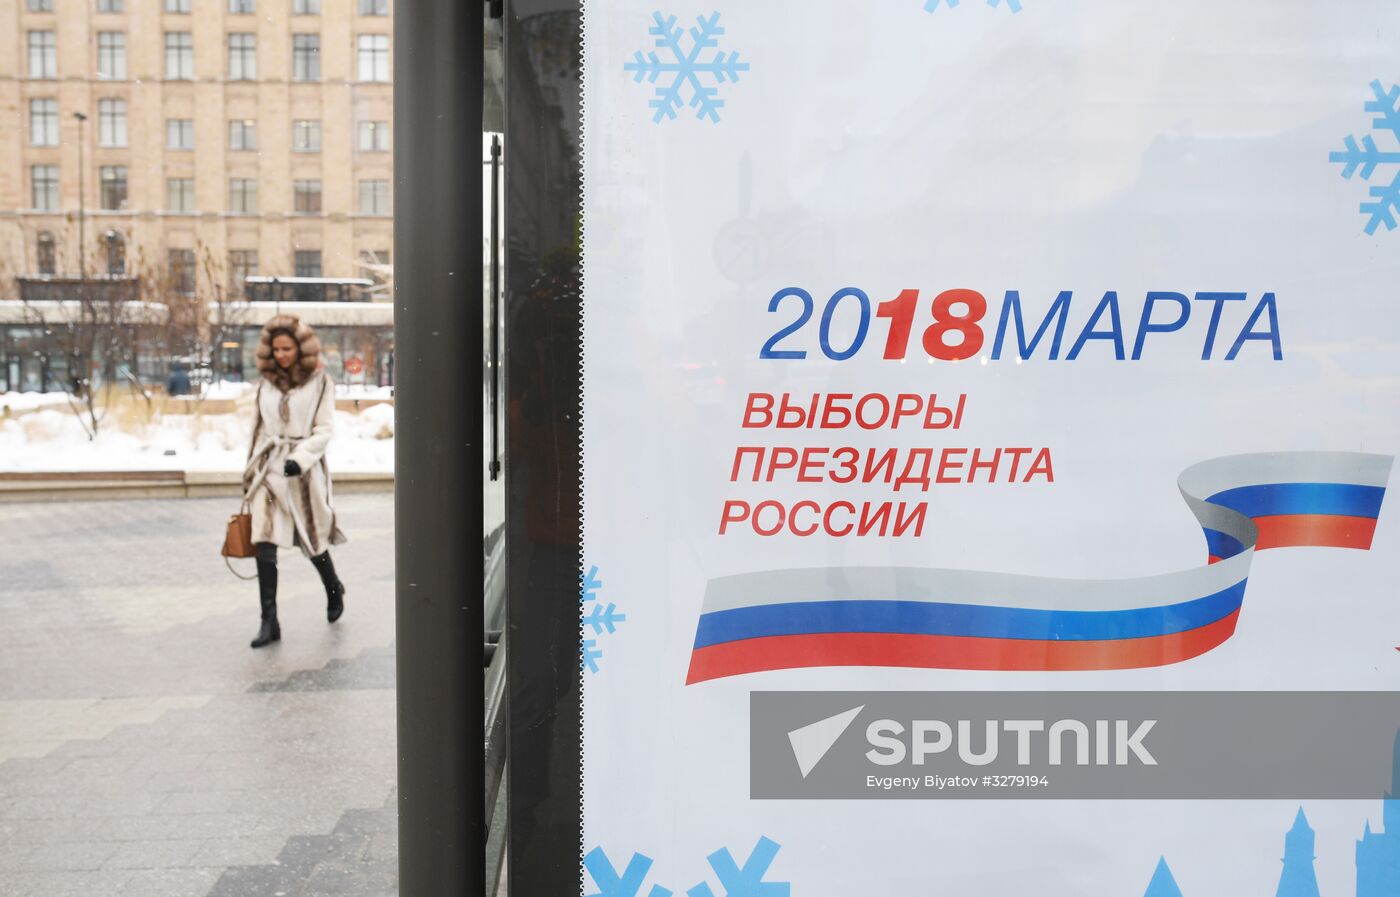 Presidential election campaign in Moscow